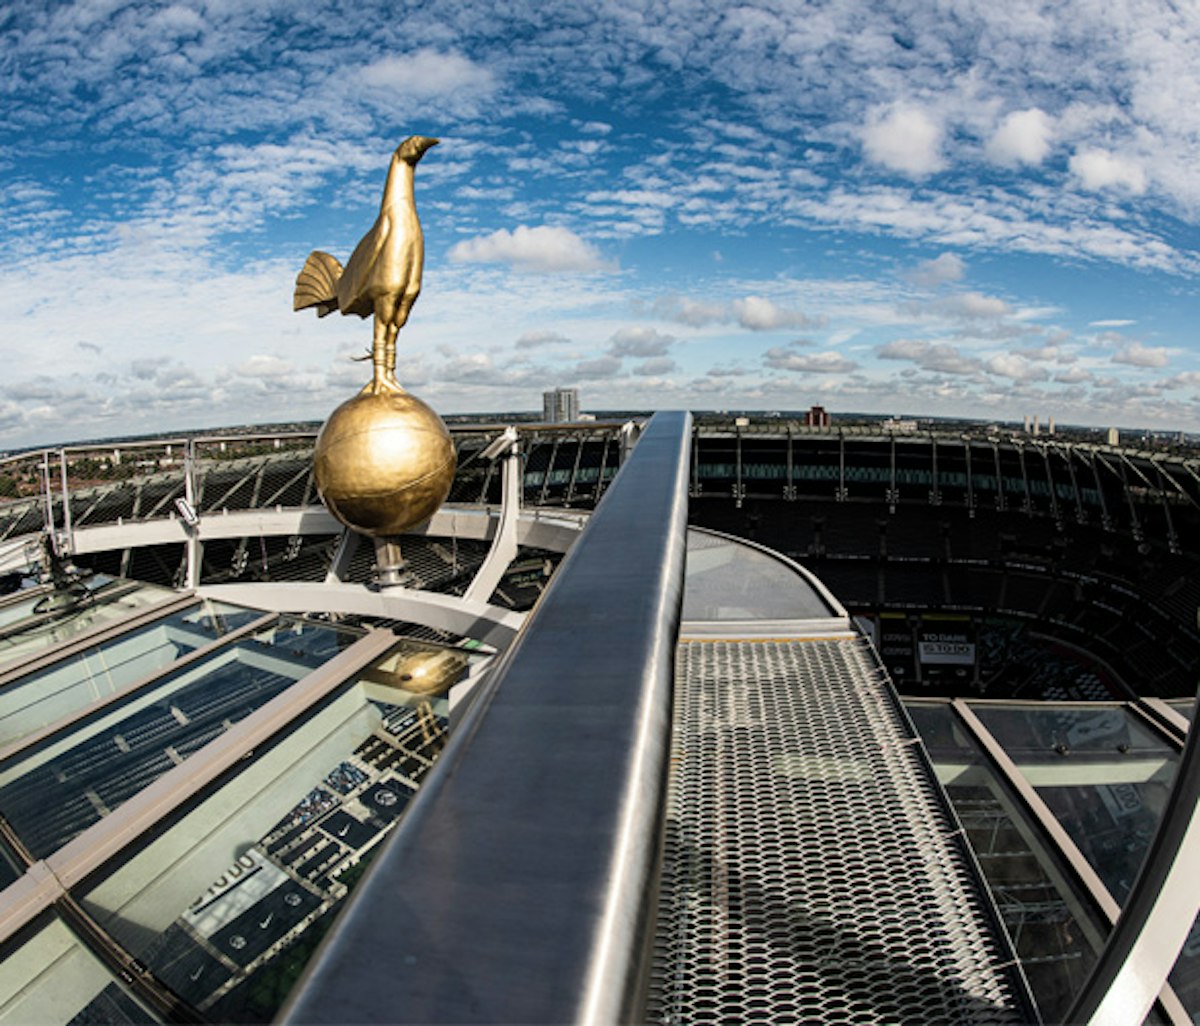 Golden bird statue on a globe overlooking a stadium from an elevated perspective.